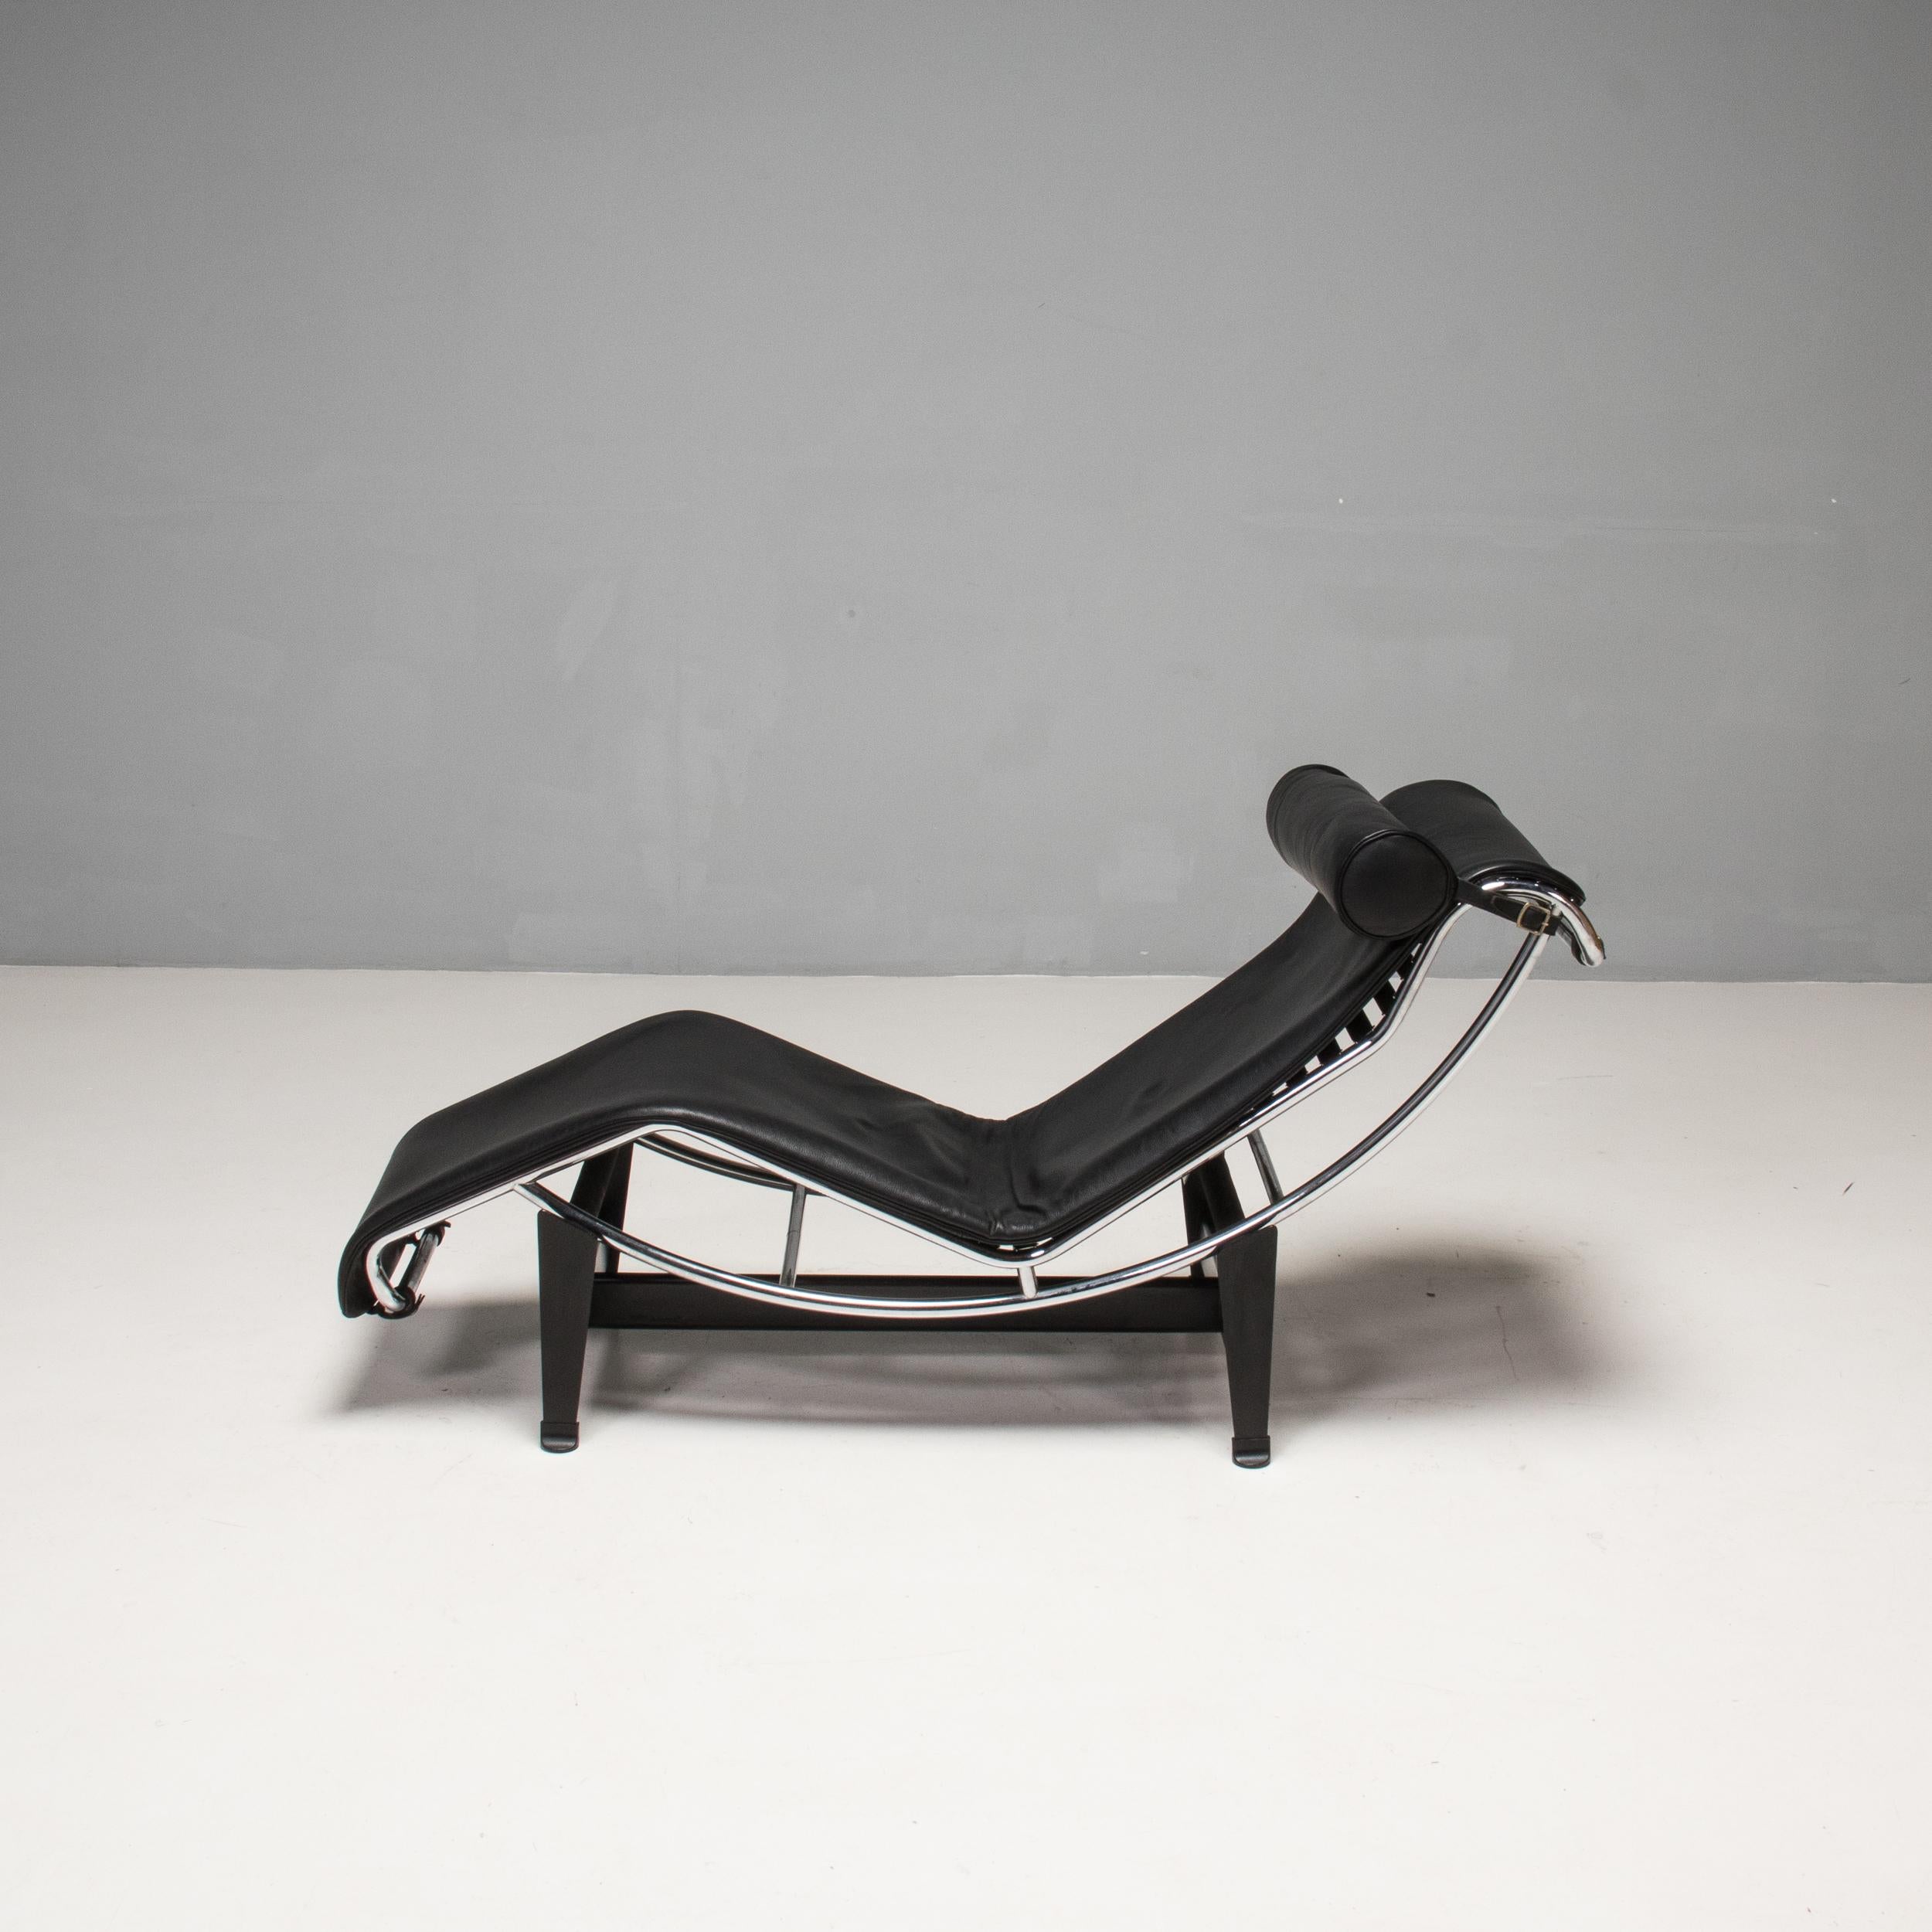 Italian Le Corbusier, Pierre Jeanneret & Charlotte Perriand LC4 Chaise Lounge by Cassina